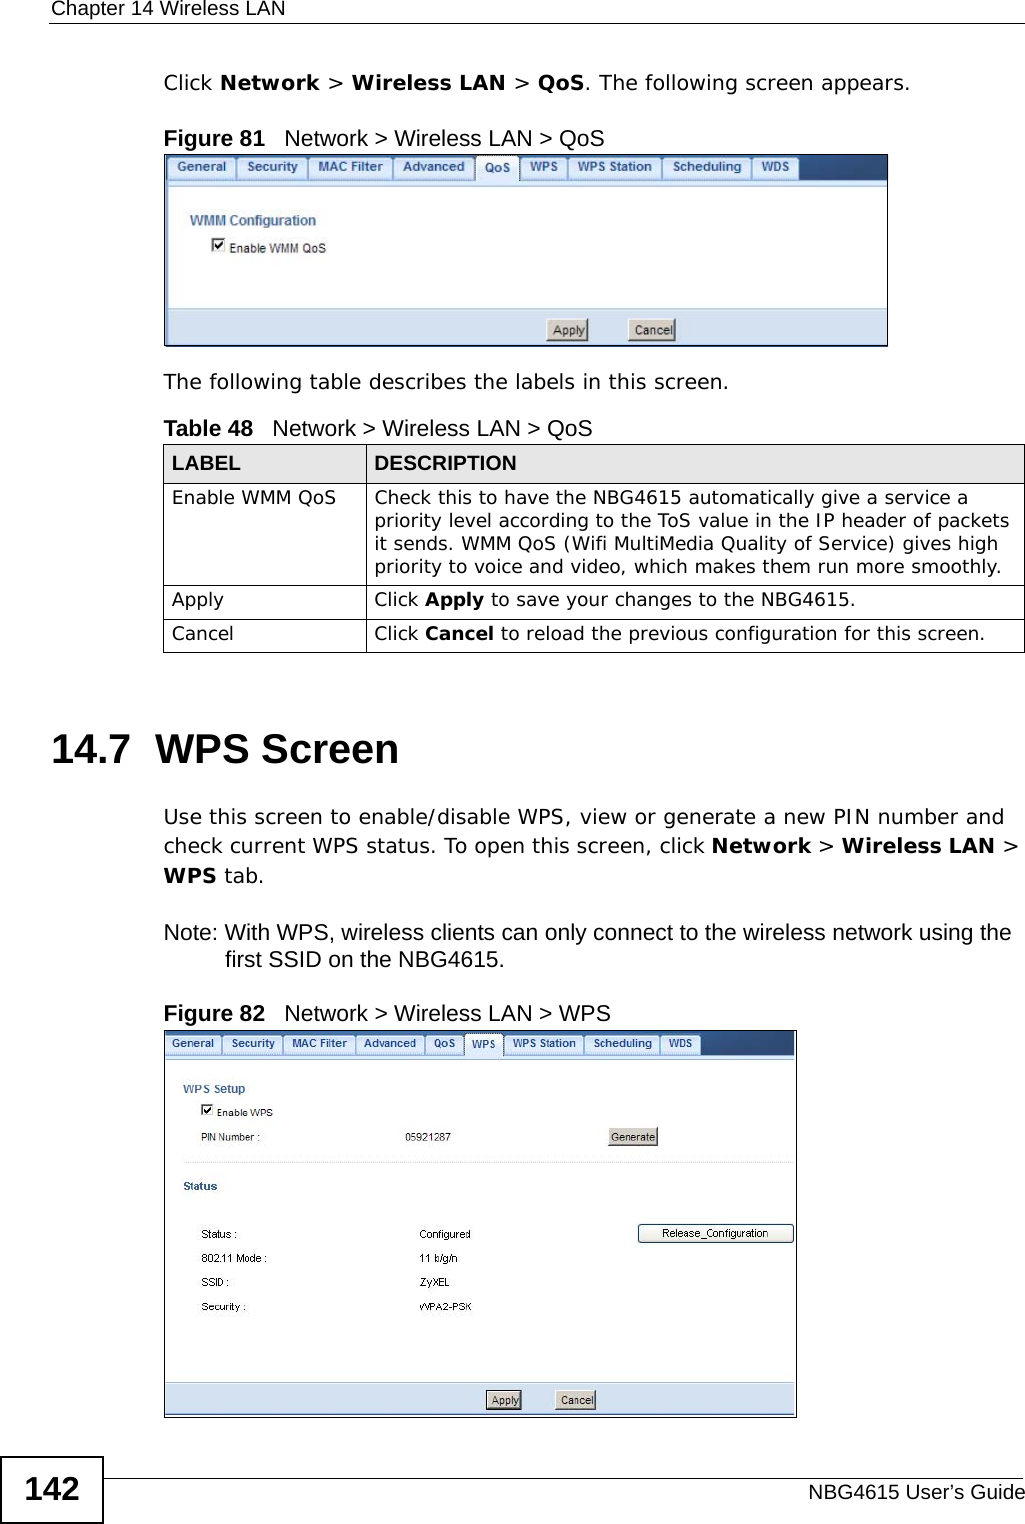 Chapter 14 Wireless LANNBG4615 User’s Guide142Click Network &gt; Wireless LAN &gt; QoS. The following screen appears.Figure 81   Network &gt; Wireless LAN &gt; QoS The following table describes the labels in this screen. 14.7  WPS ScreenUse this screen to enable/disable WPS, view or generate a new PIN number and check current WPS status. To open this screen, click Network &gt; Wireless LAN &gt; WPS tab.Note: With WPS, wireless clients can only connect to the wireless network using the first SSID on the NBG4615.Figure 82   Network &gt; Wireless LAN &gt; WPSTable 48   Network &gt; Wireless LAN &gt; QoSLABEL DESCRIPTIONEnable WMM QoS Check this to have the NBG4615 automatically give a service a priority level according to the ToS value in the IP header of packets it sends. WMM QoS (Wifi MultiMedia Quality of Service) gives high priority to voice and video, which makes them run more smoothly.Apply Click Apply to save your changes to the NBG4615.Cancel Click Cancel to reload the previous configuration for this screen.